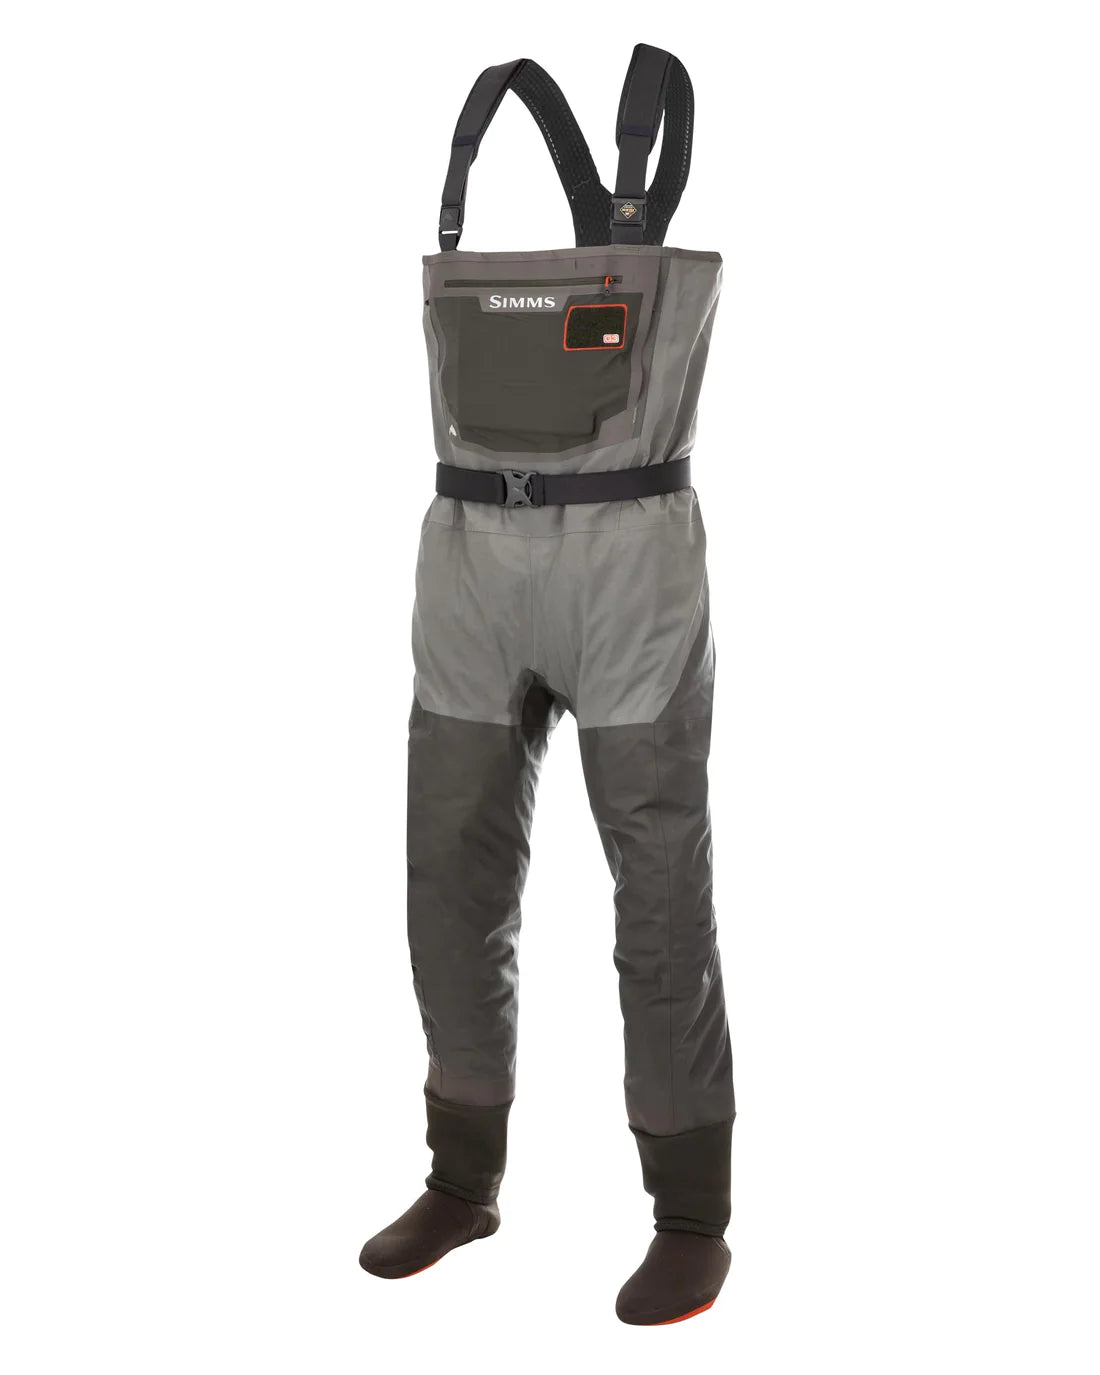 Men's Outdoor Breathable Durable Fishing Stocking Foot Chest Wader